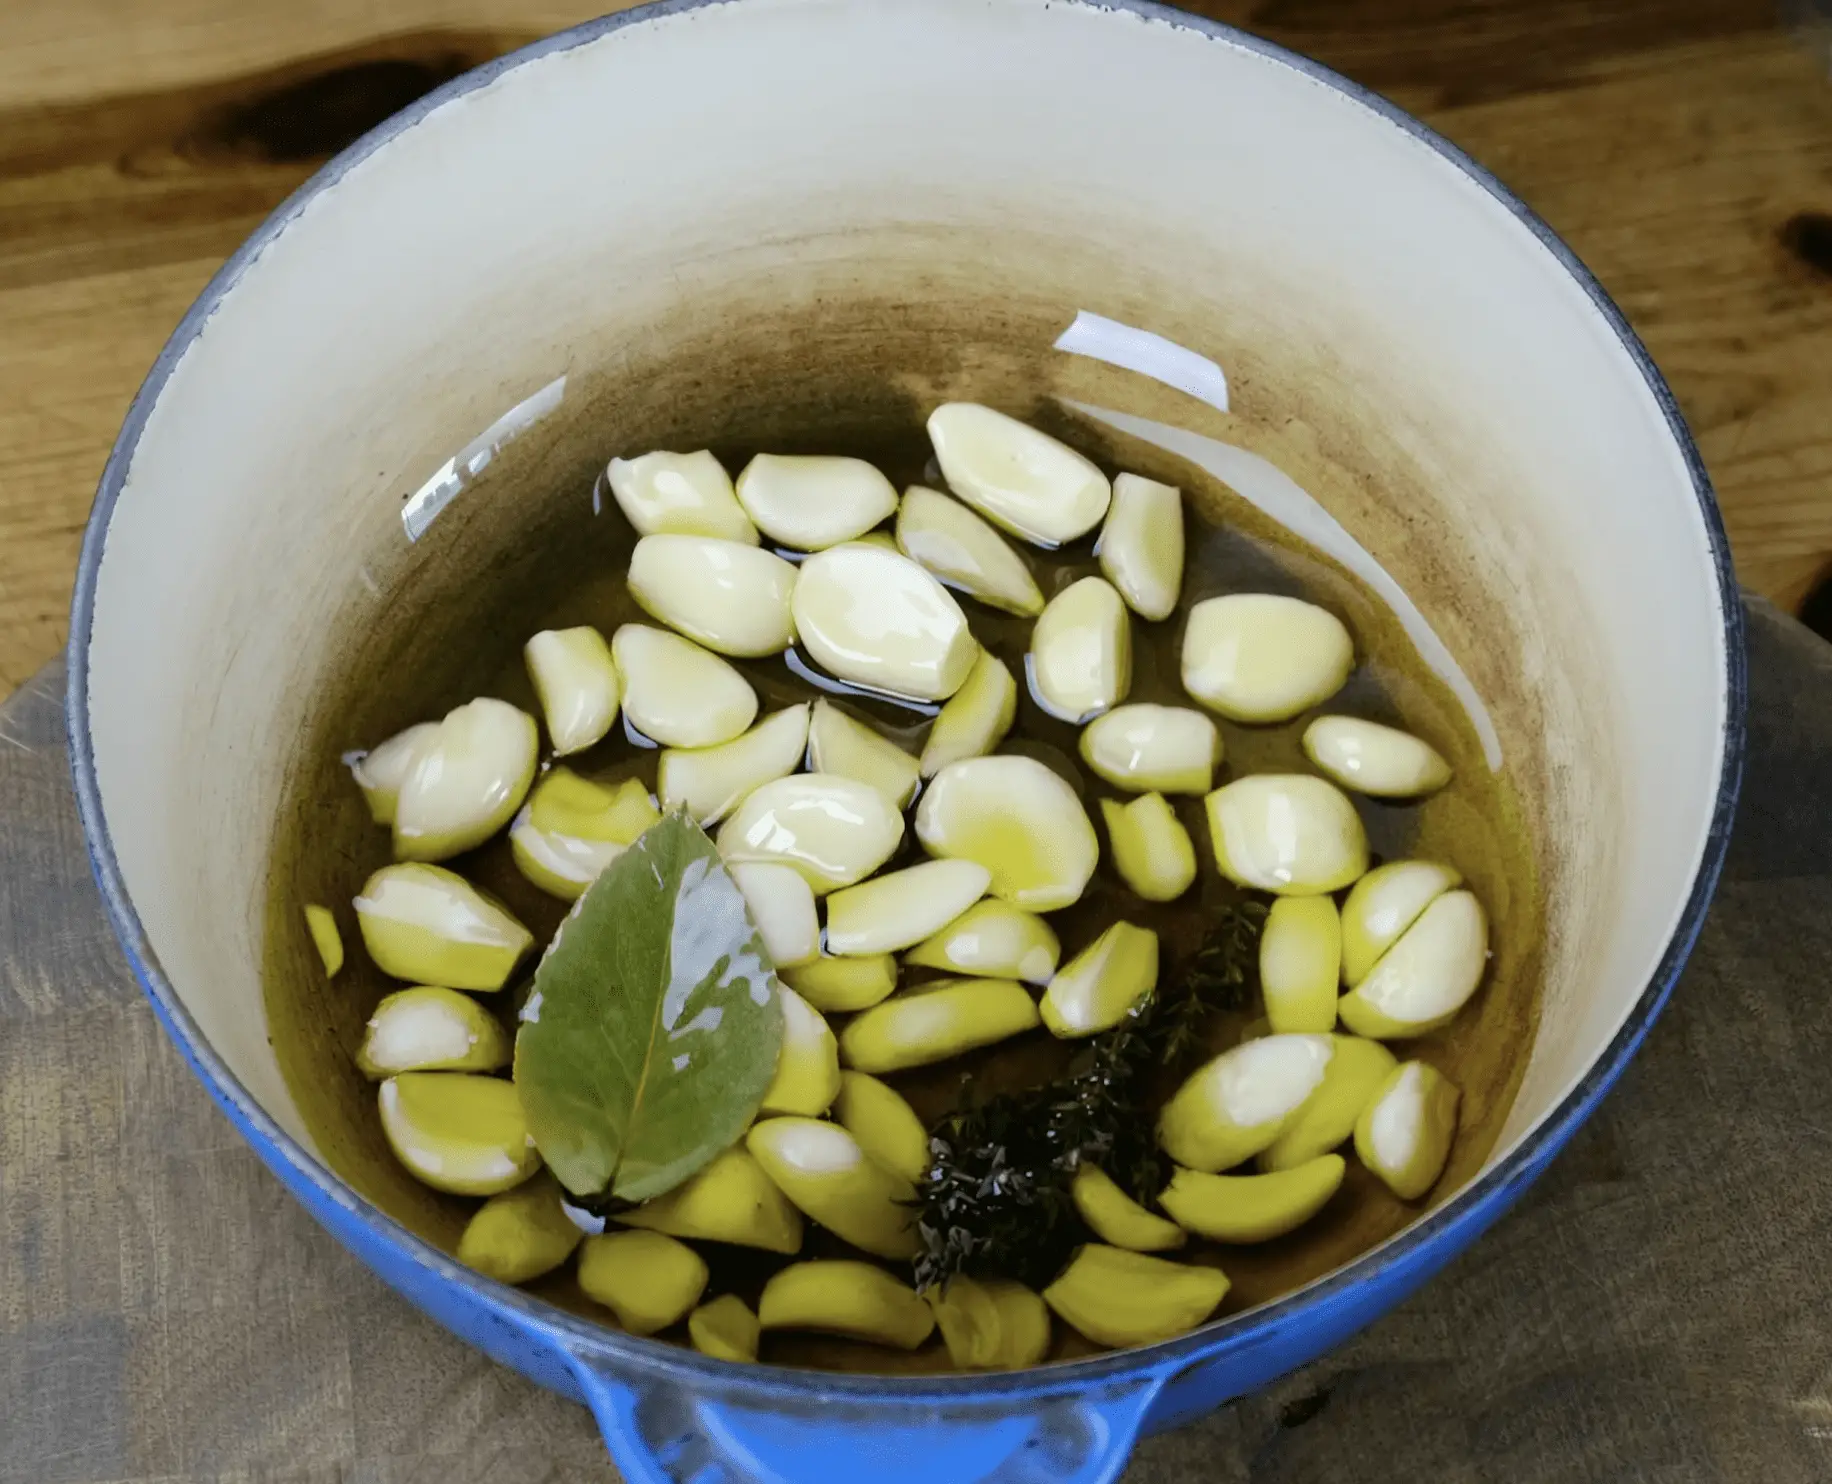 Garlic Confit before cooking